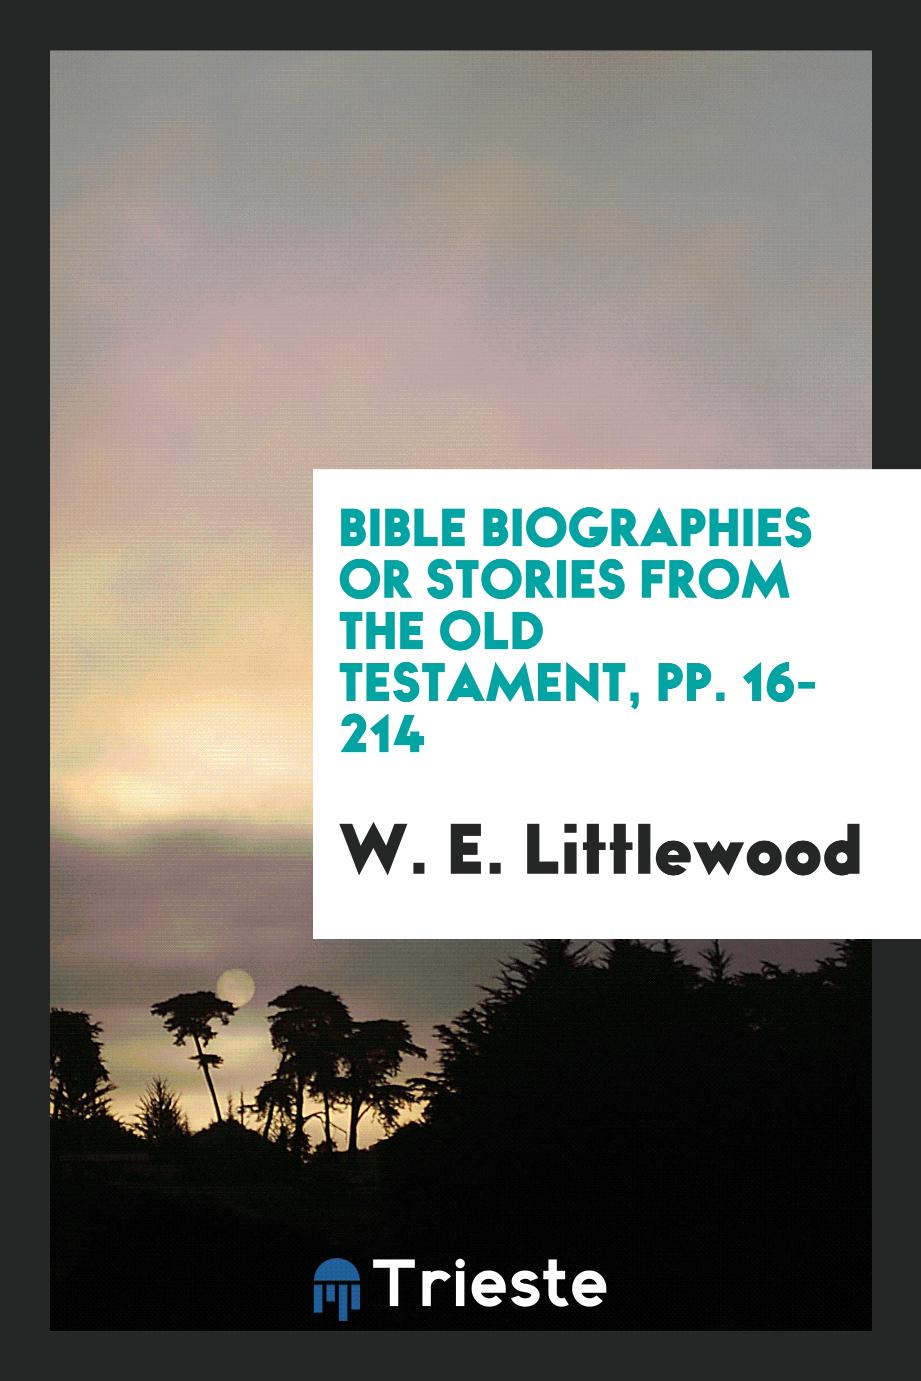 Bible Biographies or Stories from the Old Testament, pp. 16-214